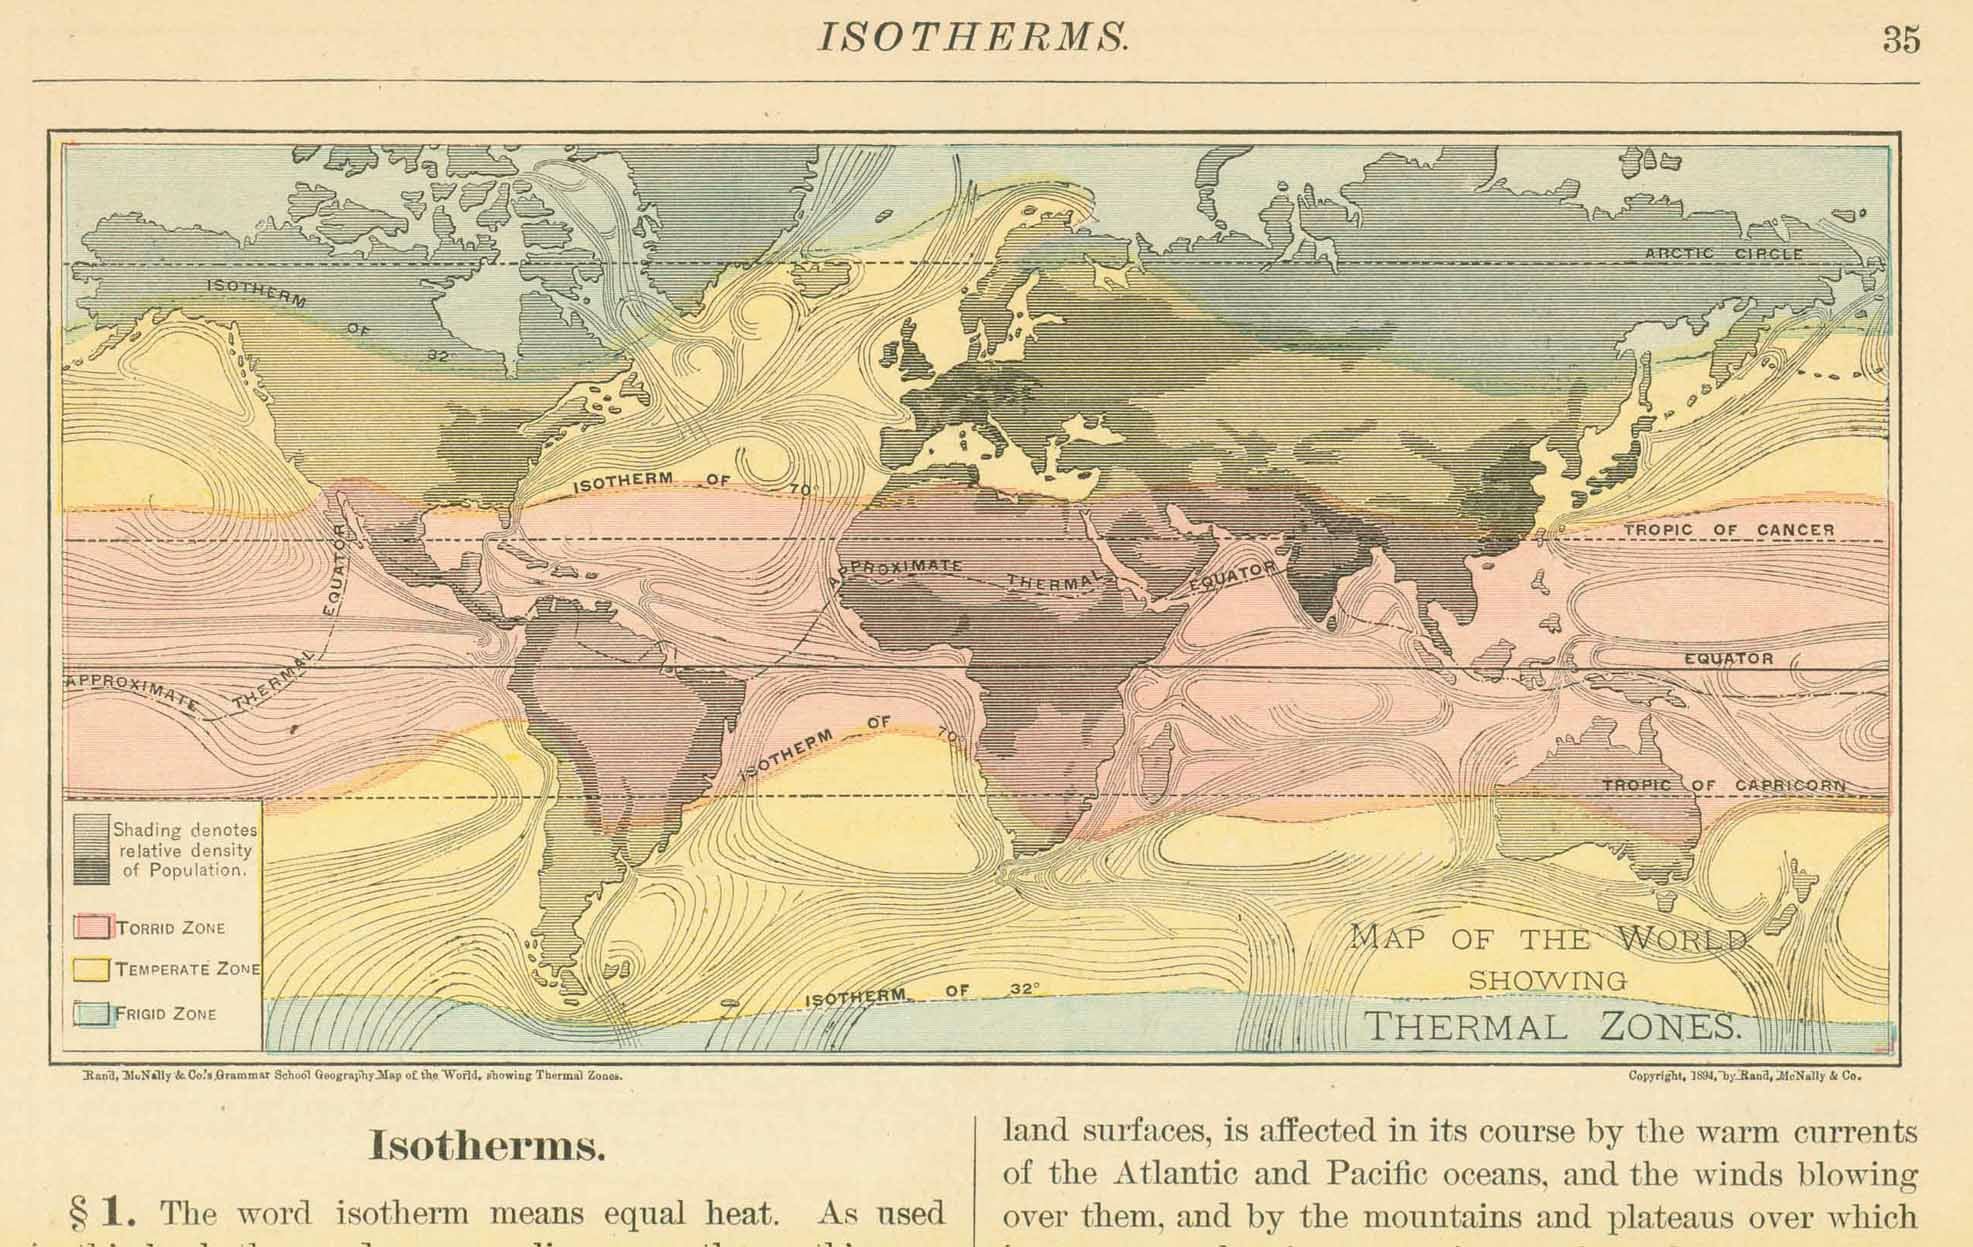 Antique print, World Map, "Isotherms"  For a 30% discount enter MAPS30 at chekout   Image on a page of text about Isotherms. On the reverse side is a map of the hemispheres. Published ca 1900.  Original antique print    Printed in color.